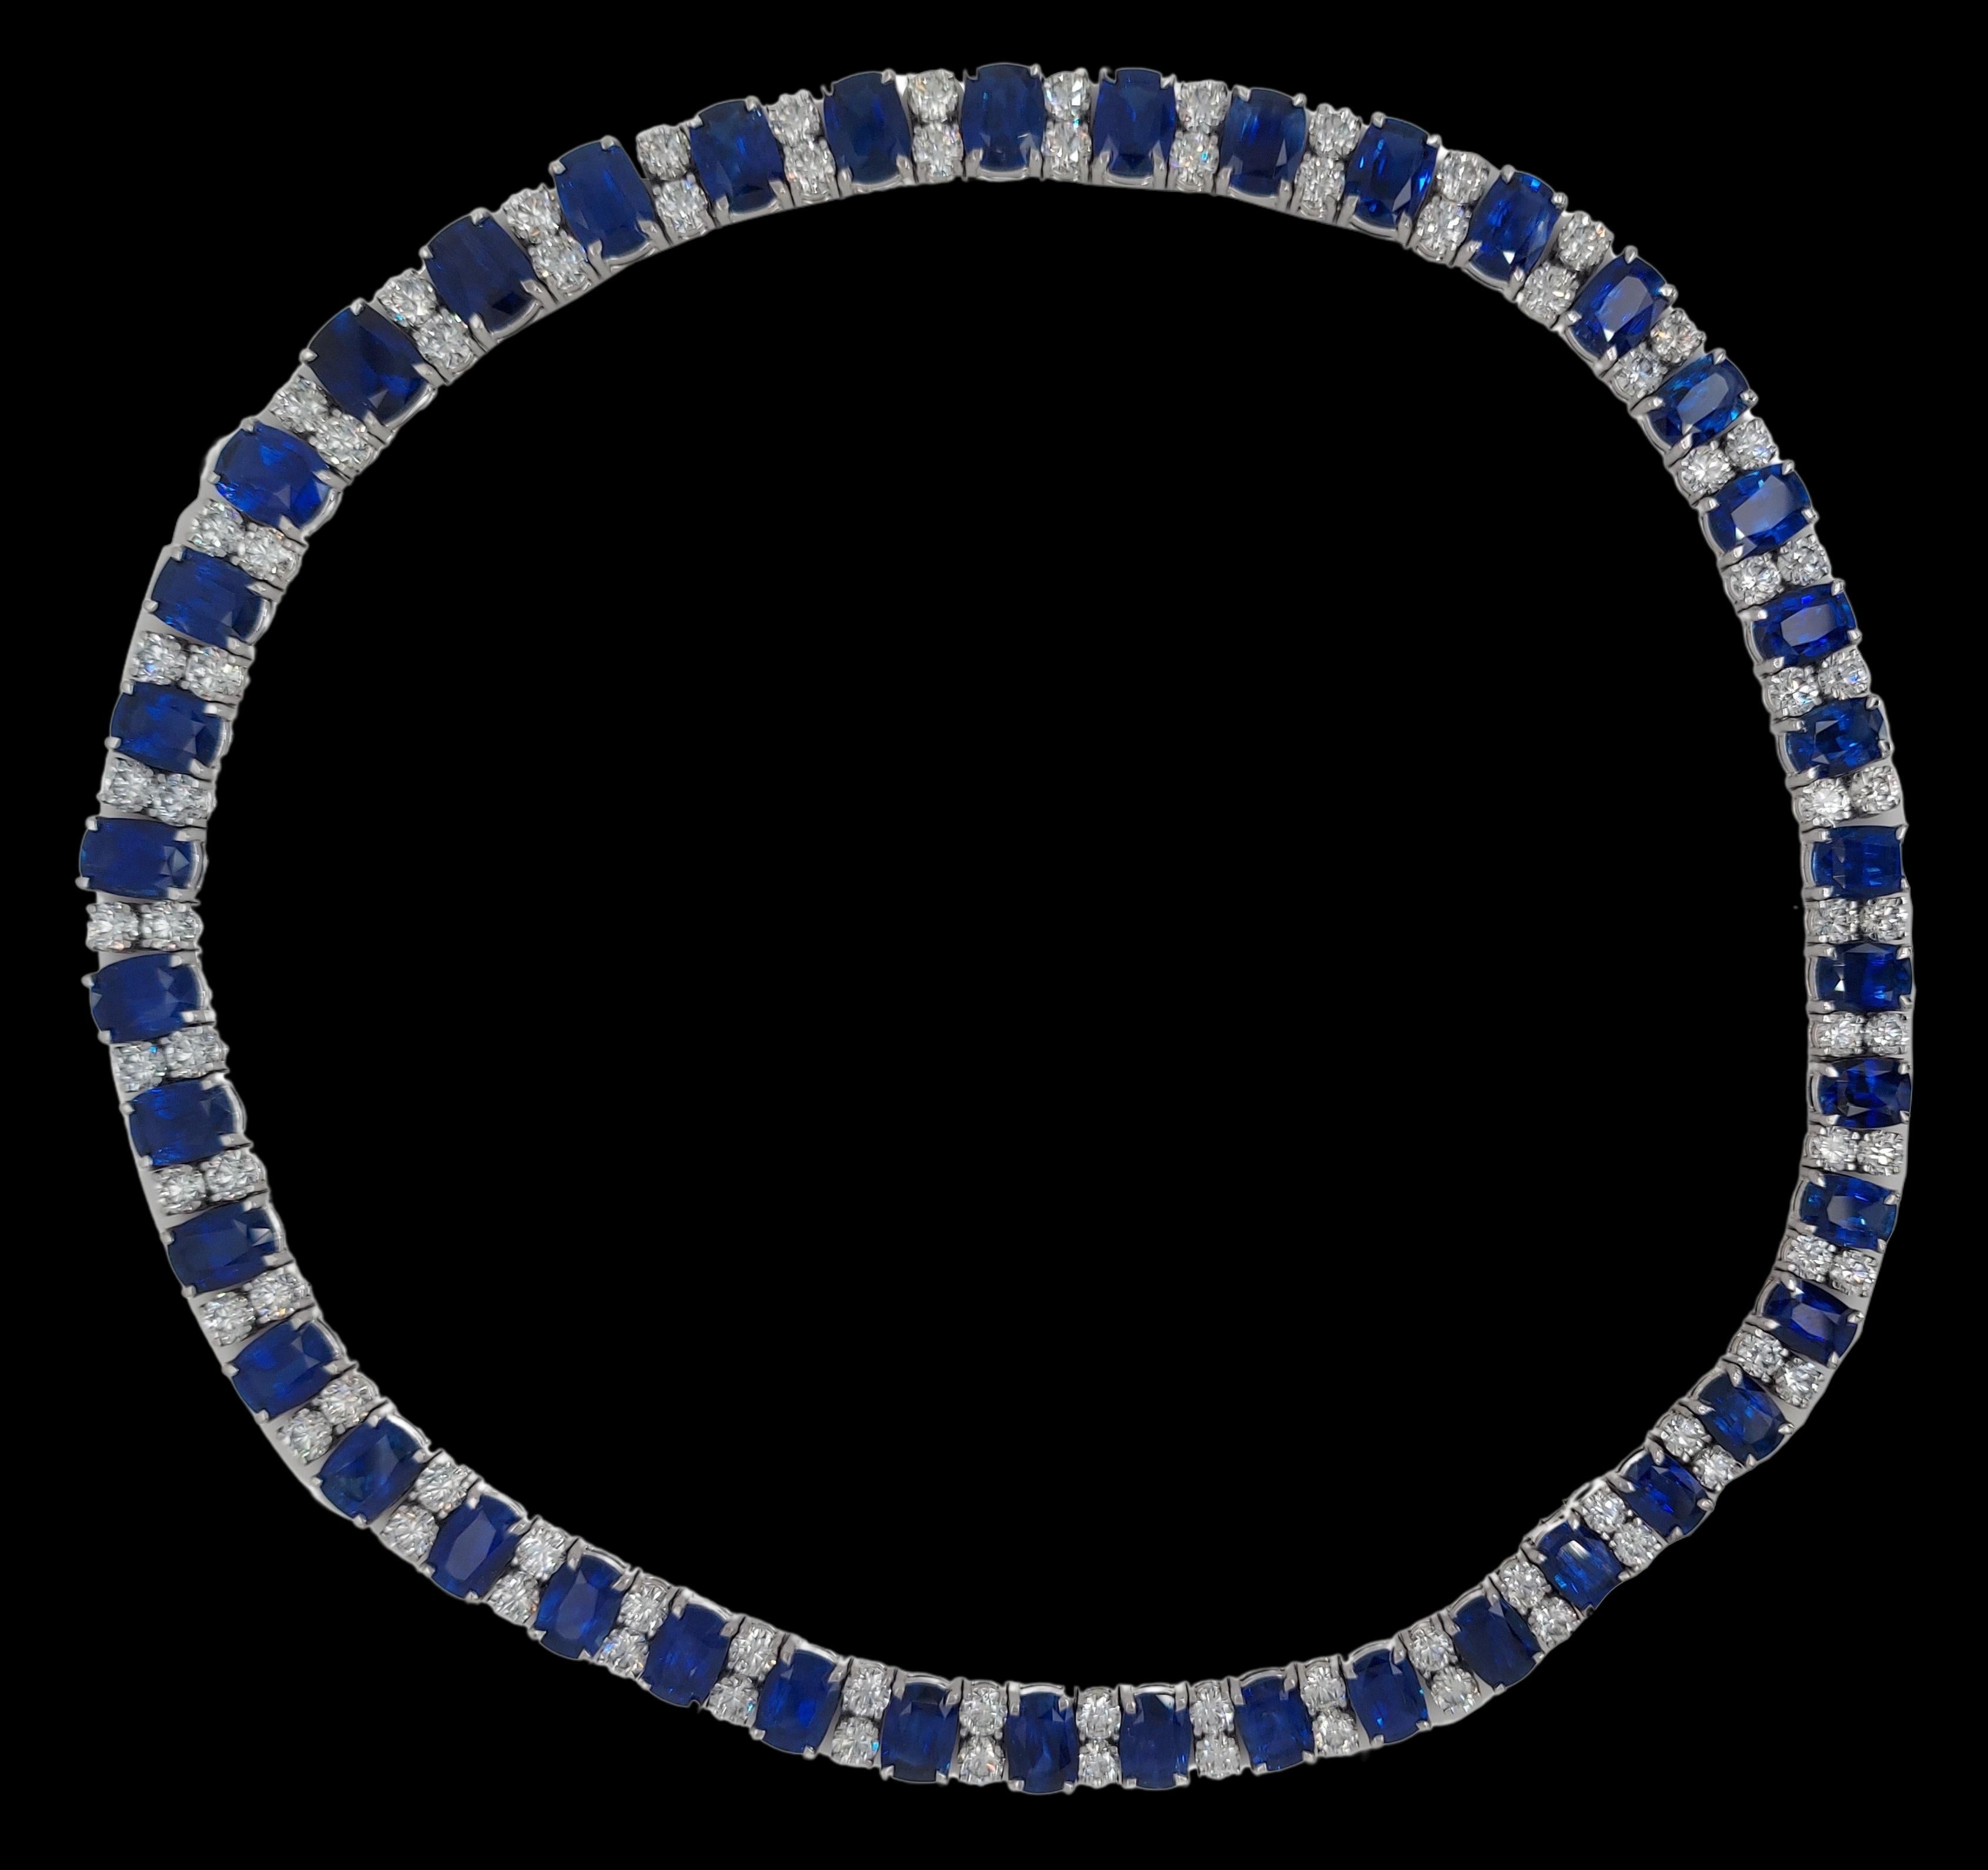 18kt White Gold 59.31ct Sapphire, 17.13ct Diamonds CGL Certified

Most beautiful Sapphire and diamond necklace (Also available to be bought as a set with matching bracelet and earrings)

Sapphires: 42 Vivid blue, Cushion shape, Ceylon Sapphire